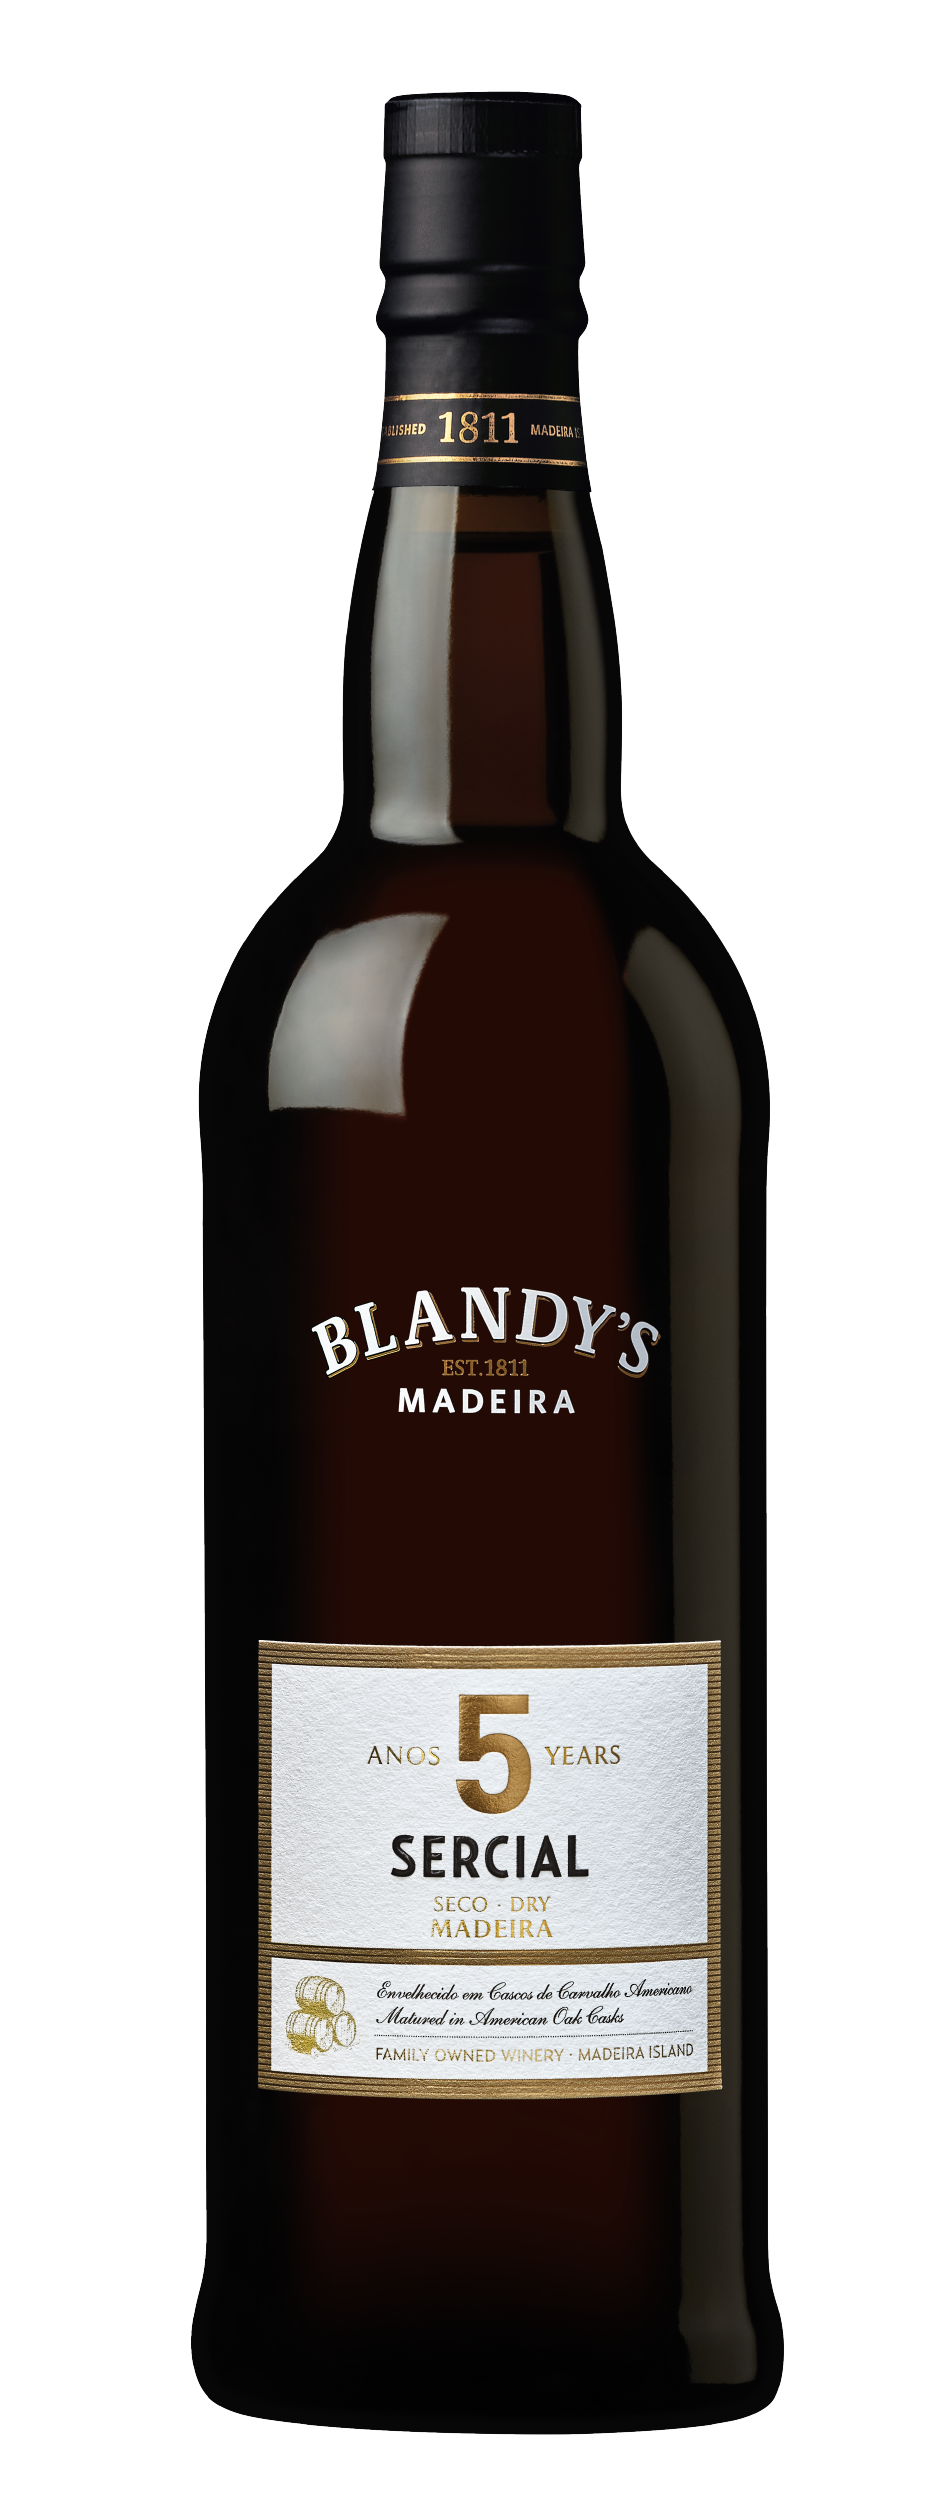 Product Image for BLANDY'S SERCIAL 5 YEAR OLD